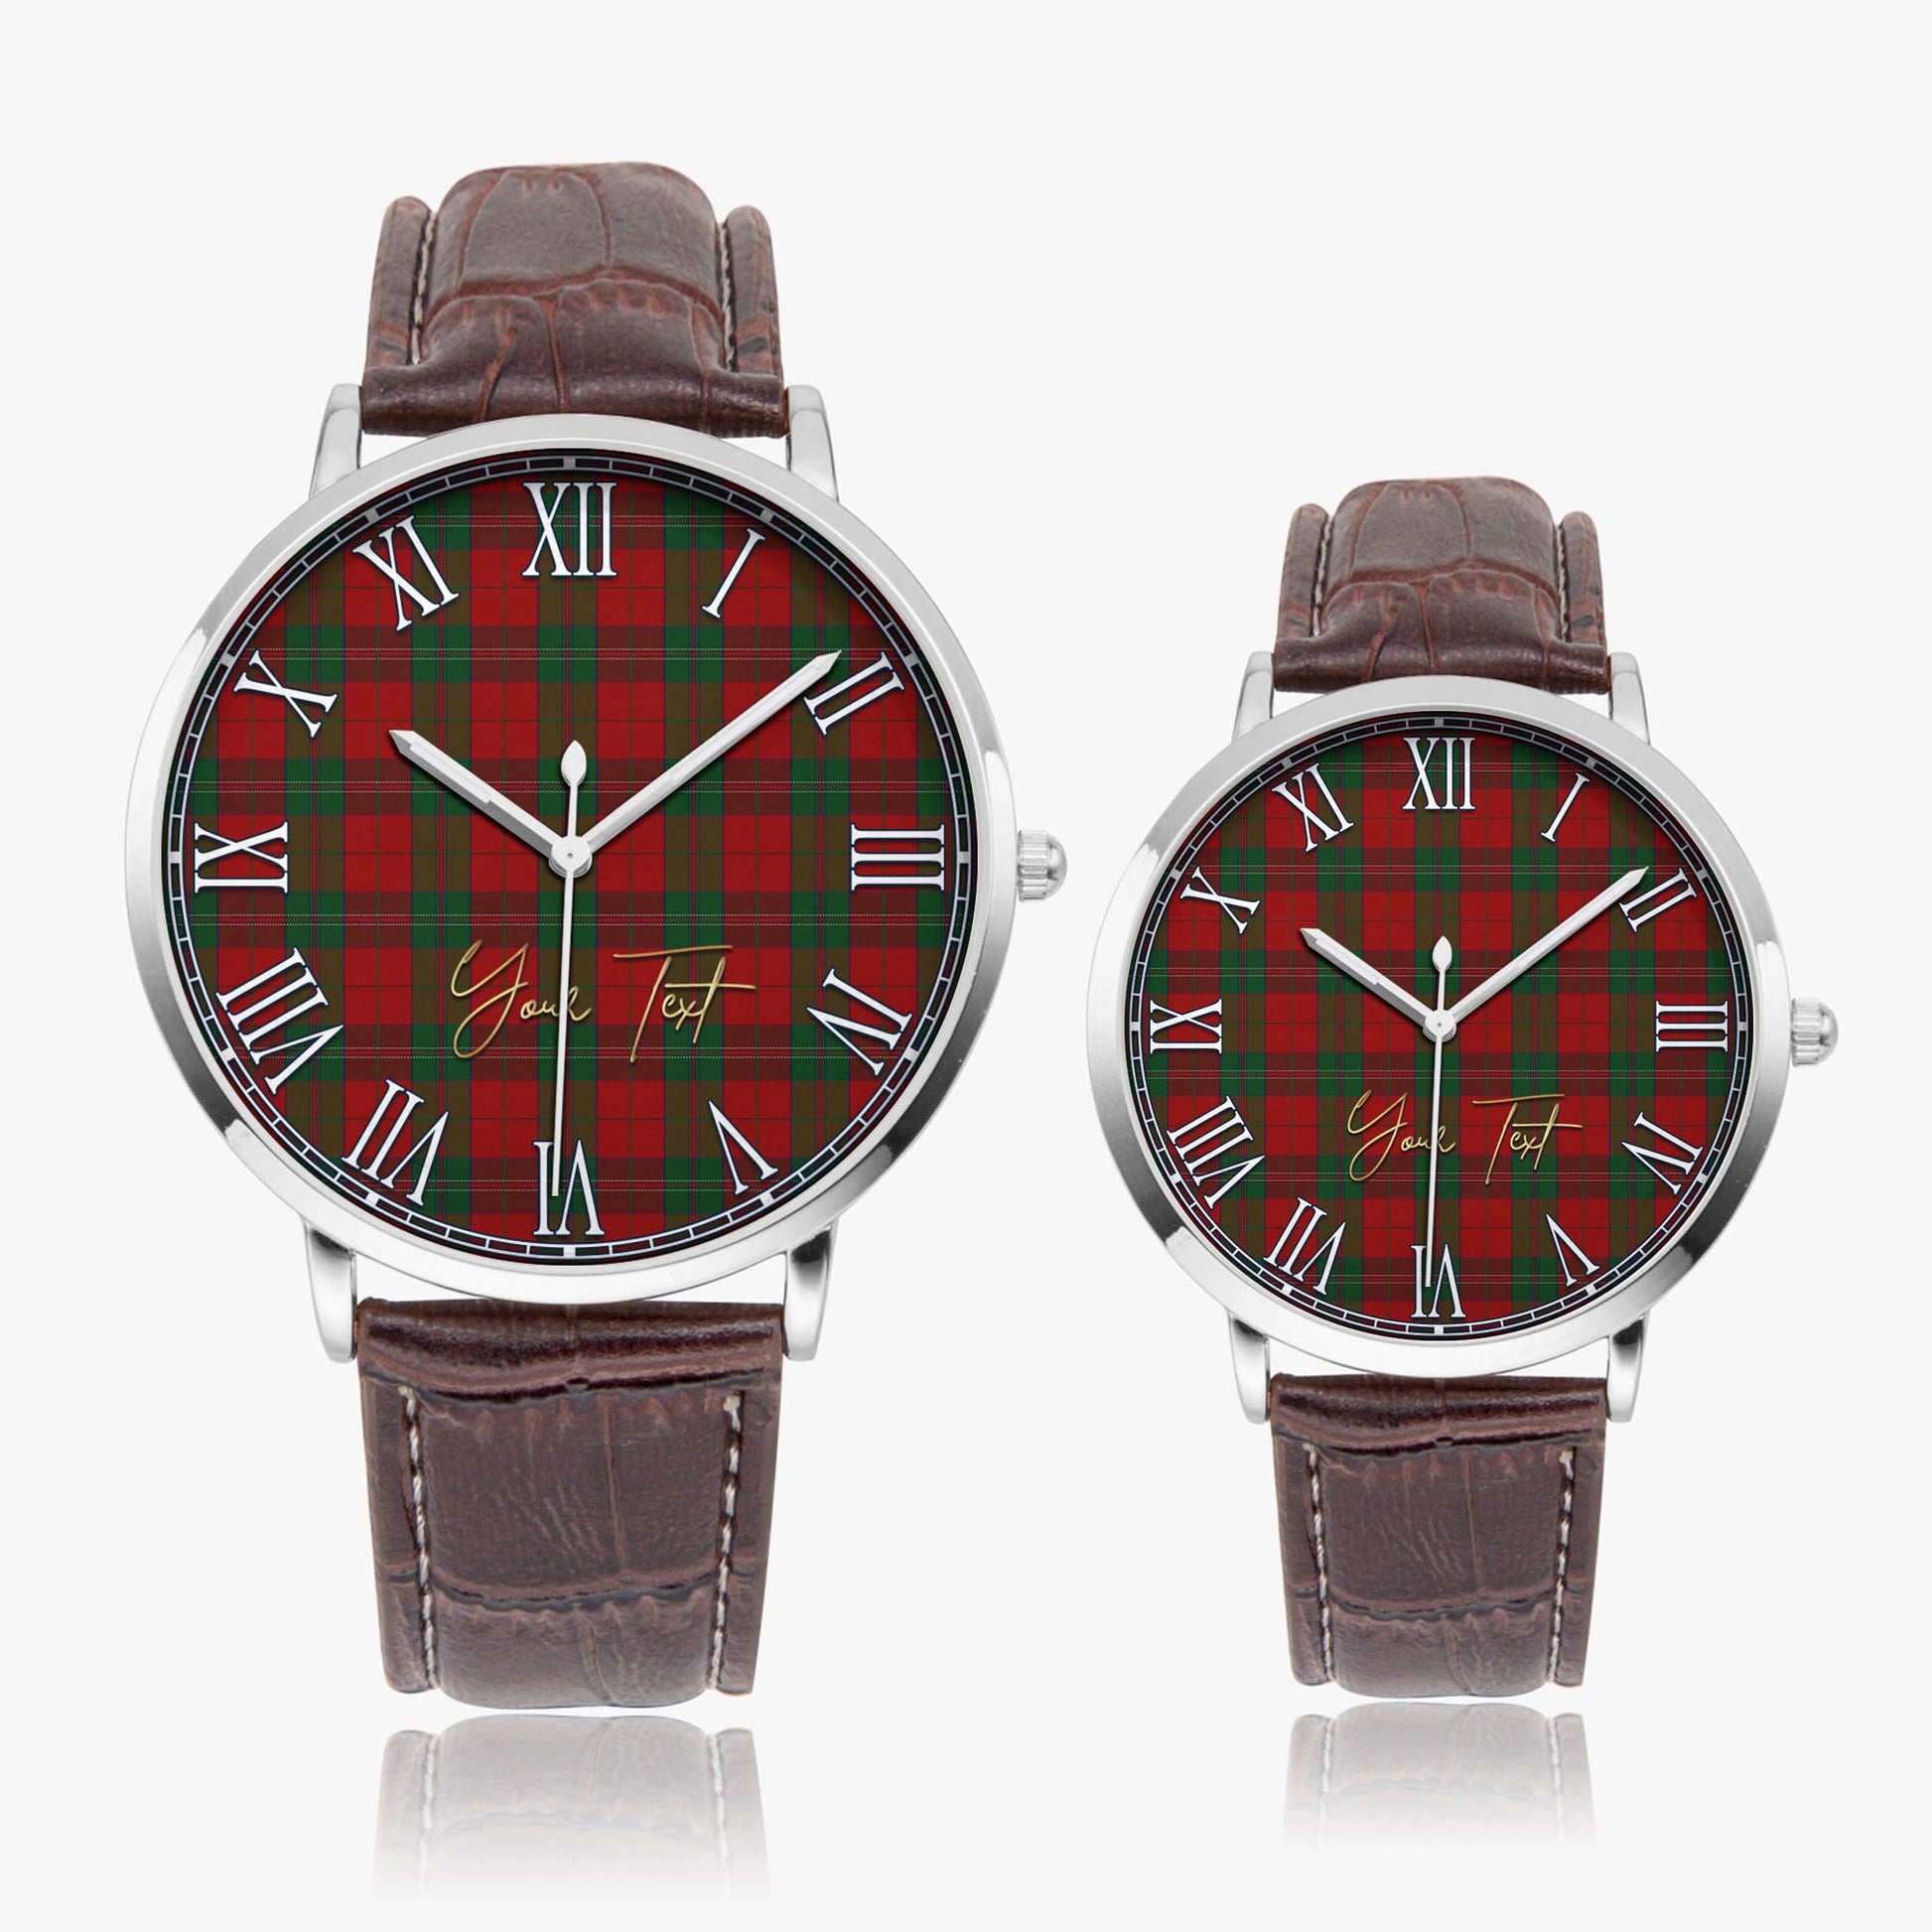 Thomas of Wales Tartan Personalized Your Text Leather Trap Quartz Watch Ultra Thin Silver Case With Brown Leather Strap - Tartanvibesclothing Shop